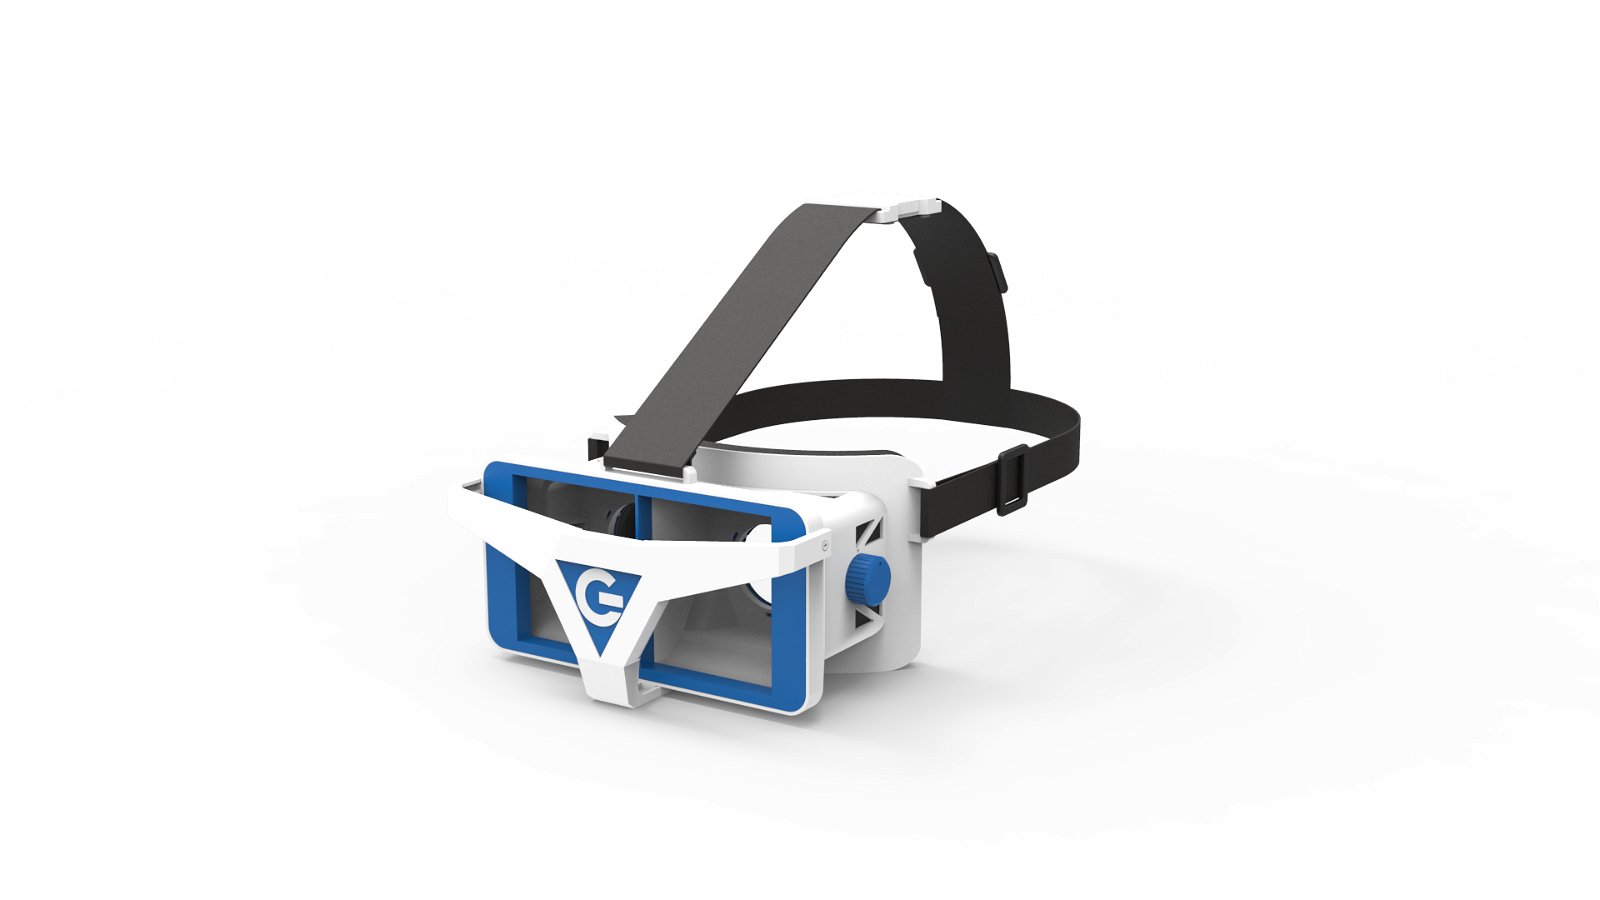 The lightest vr glasses 3D vr headset display with immersive experience for 3d v 1